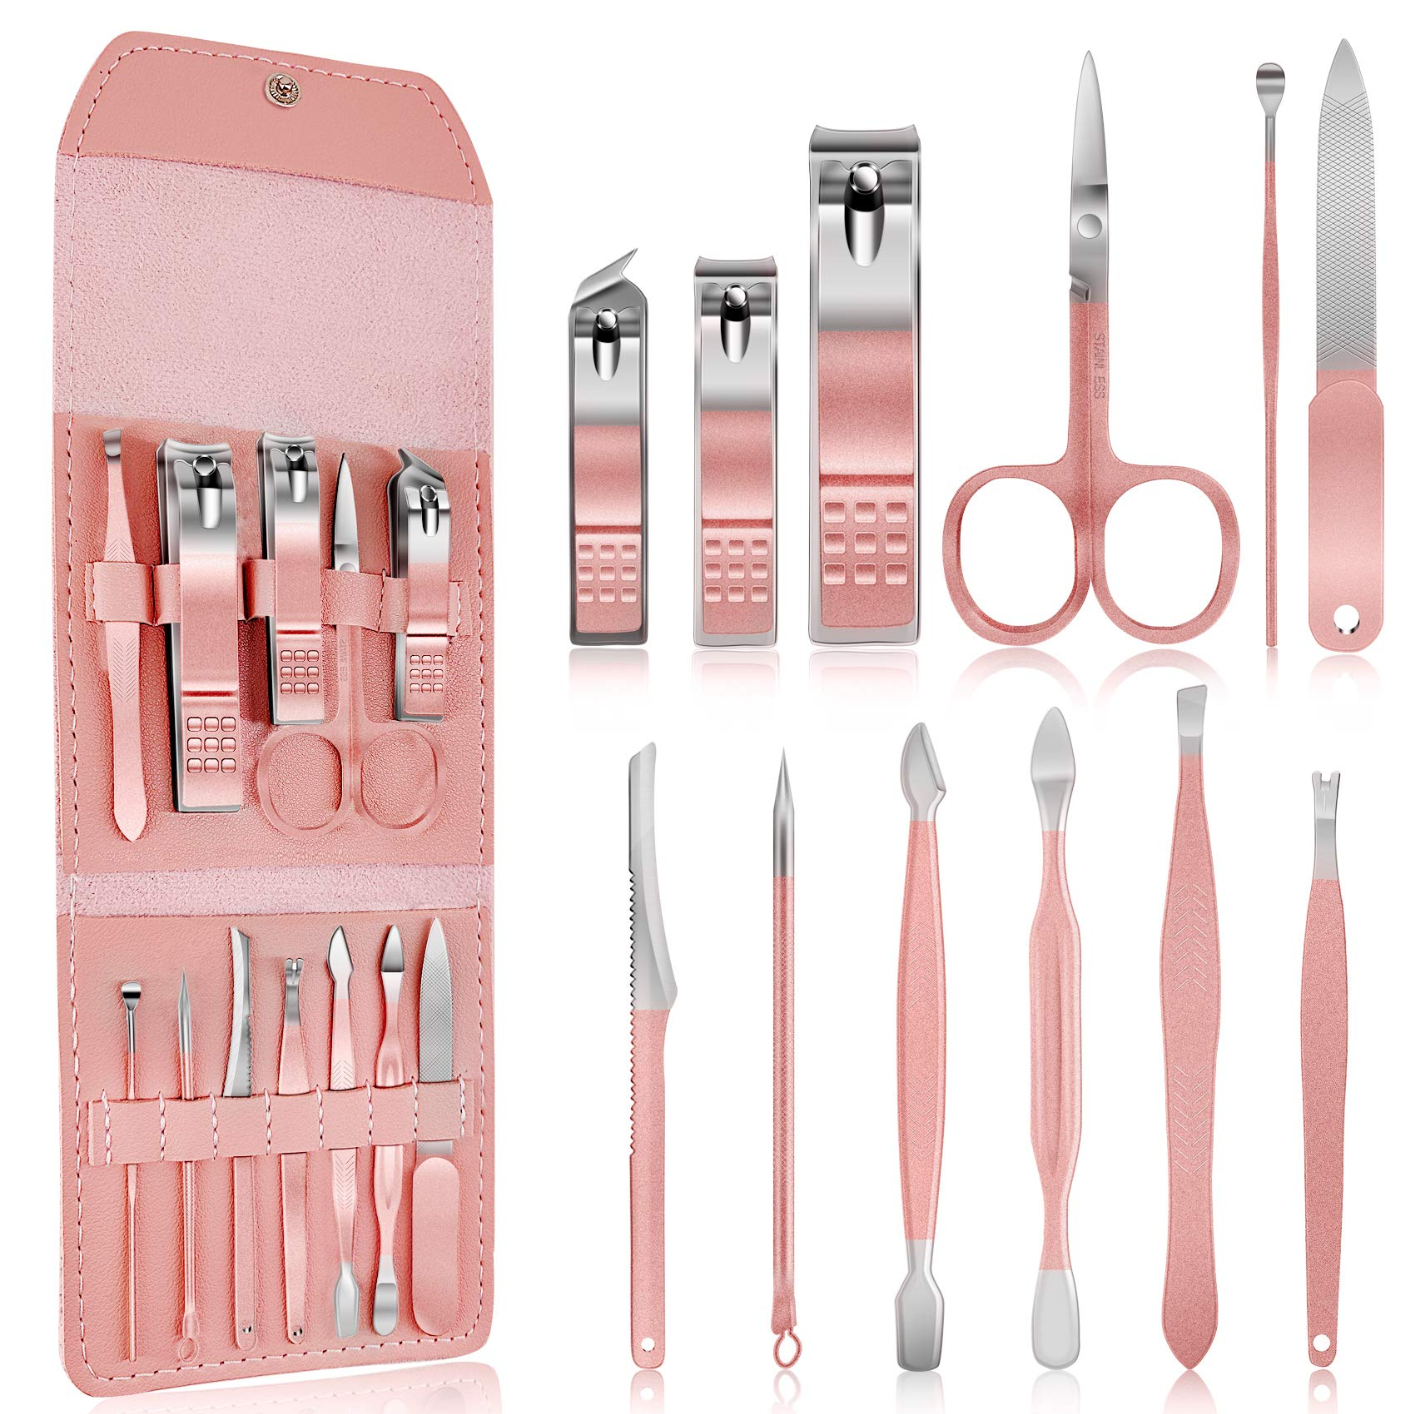 12 Pcs Manicure Set Professional Stainless Steel Care Pedicure Nail Clippers Kits for Men Women Travel Grooming Hygiene Facial Hand Foot Cutter Care Tools Set with Leather Storage Case